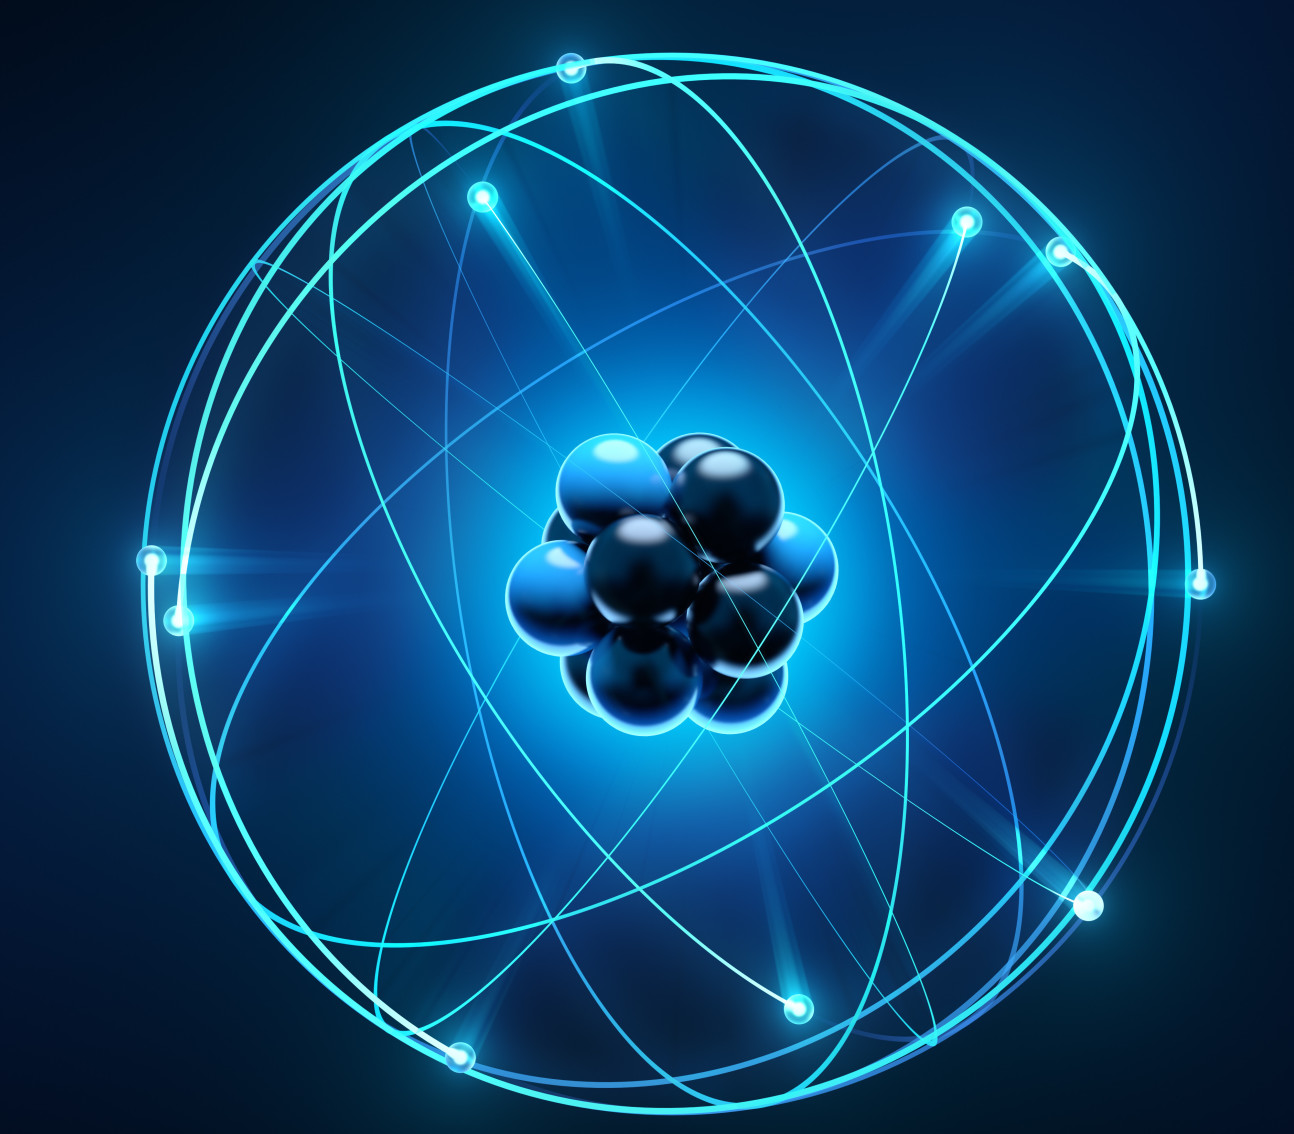 Illustration of the structure of an atom